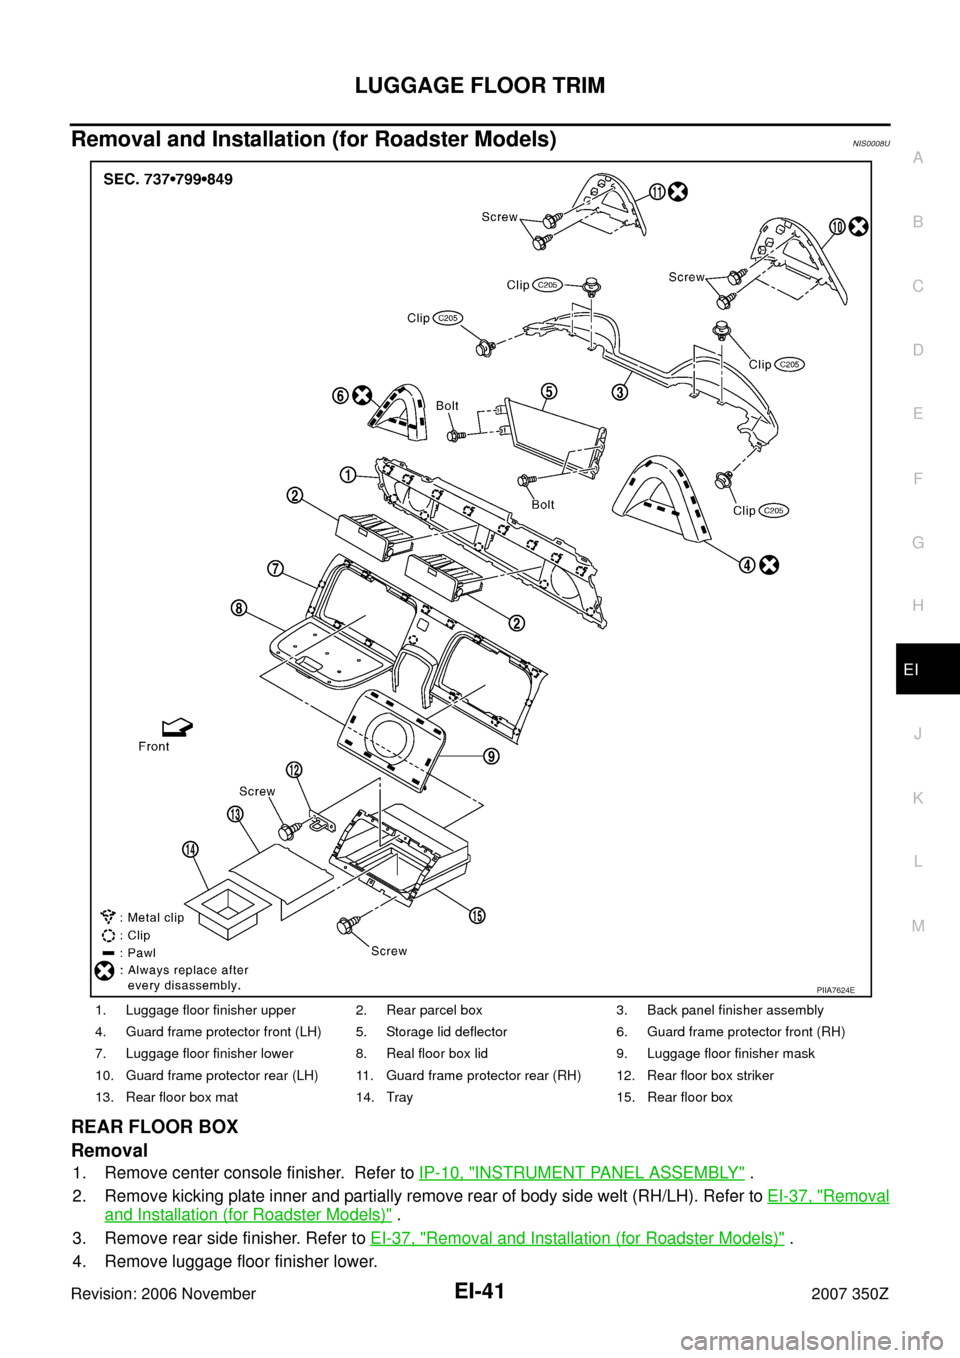 NISSAN 350Z 2007 Z33 Exterior And Interior Service Manual LUGGAGE FLOOR TRIM
EI-41
C
D
E
F
G
H
J
K
L
MA
B
EI
Revision: 2006 November2007 350Z
Removal and Installation (for Roadster Models)NIS0008U
REAR FLOOR BOX
Removal
1. Remove center console finisher.  Re